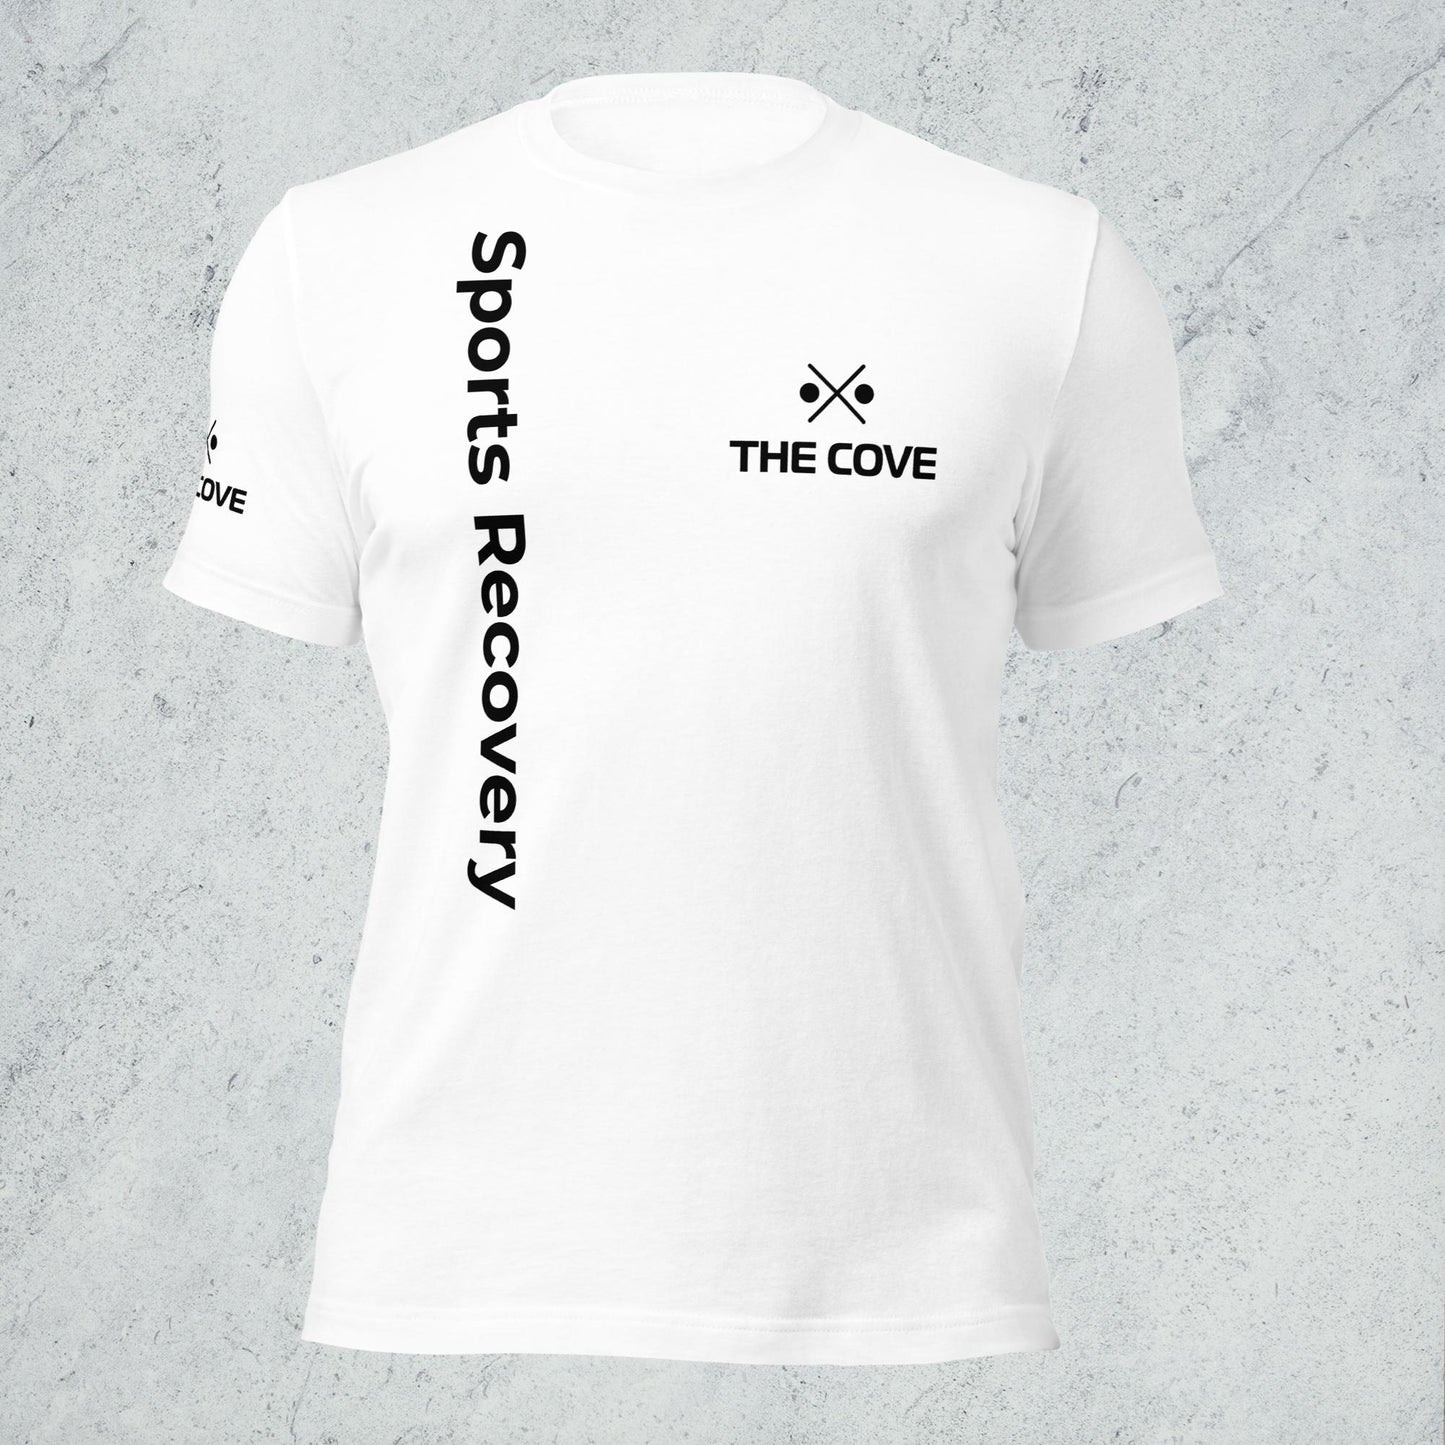 Sports Recovery Shirt